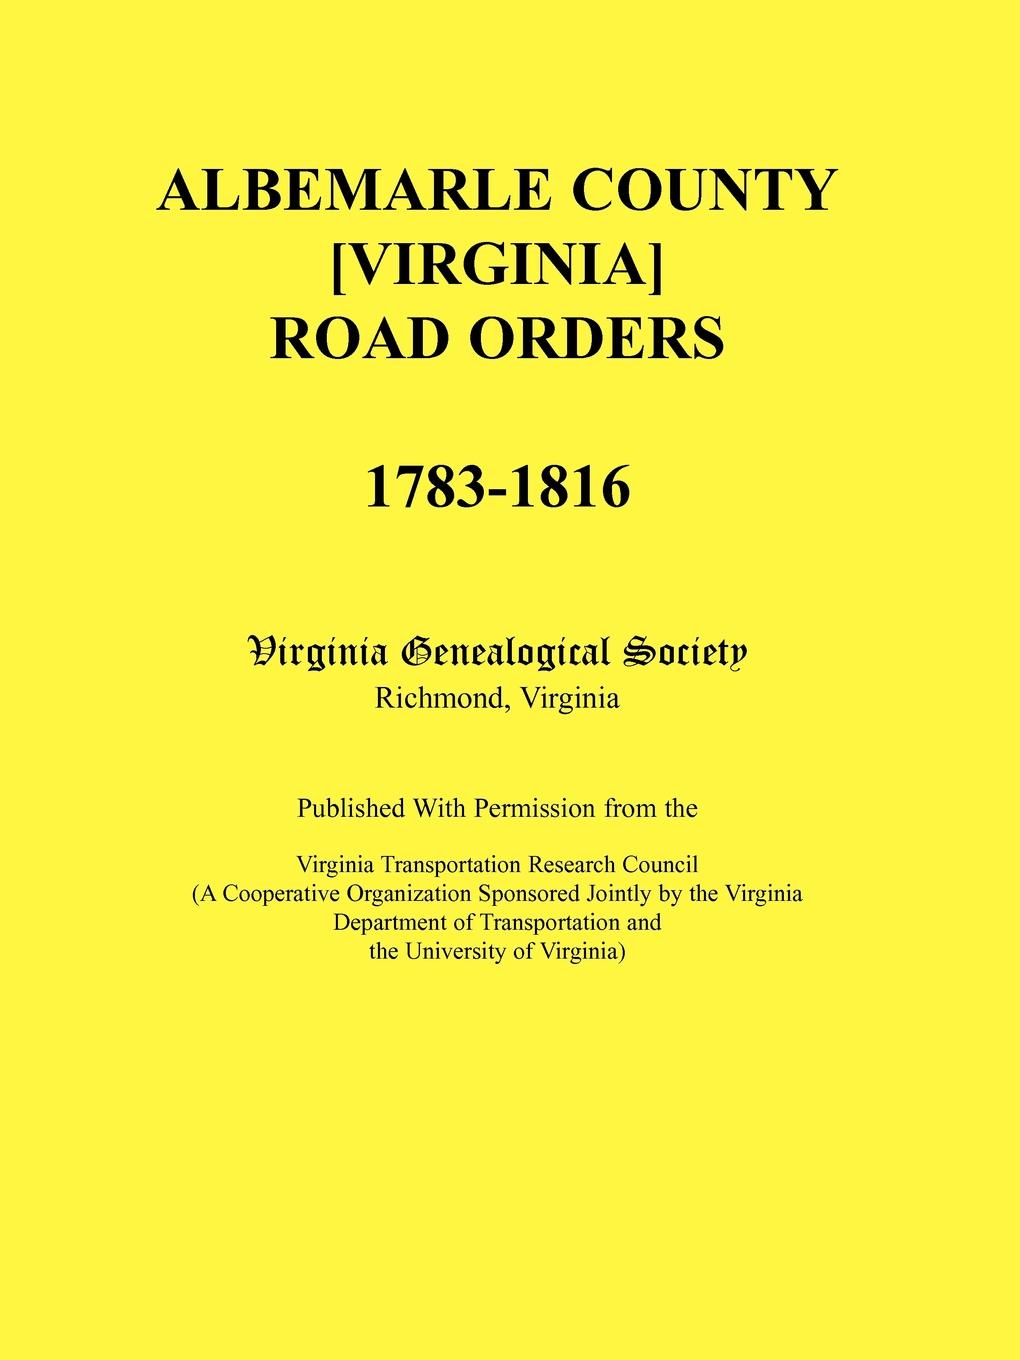 Albemarle County .Virginia. Road Orders, 1783-1816. Published With Permission from the Virginia Transportation Research Council (A Cooperative Organization Sponsored Jointly by the Virginia Department of Transportation and the University of Virginia